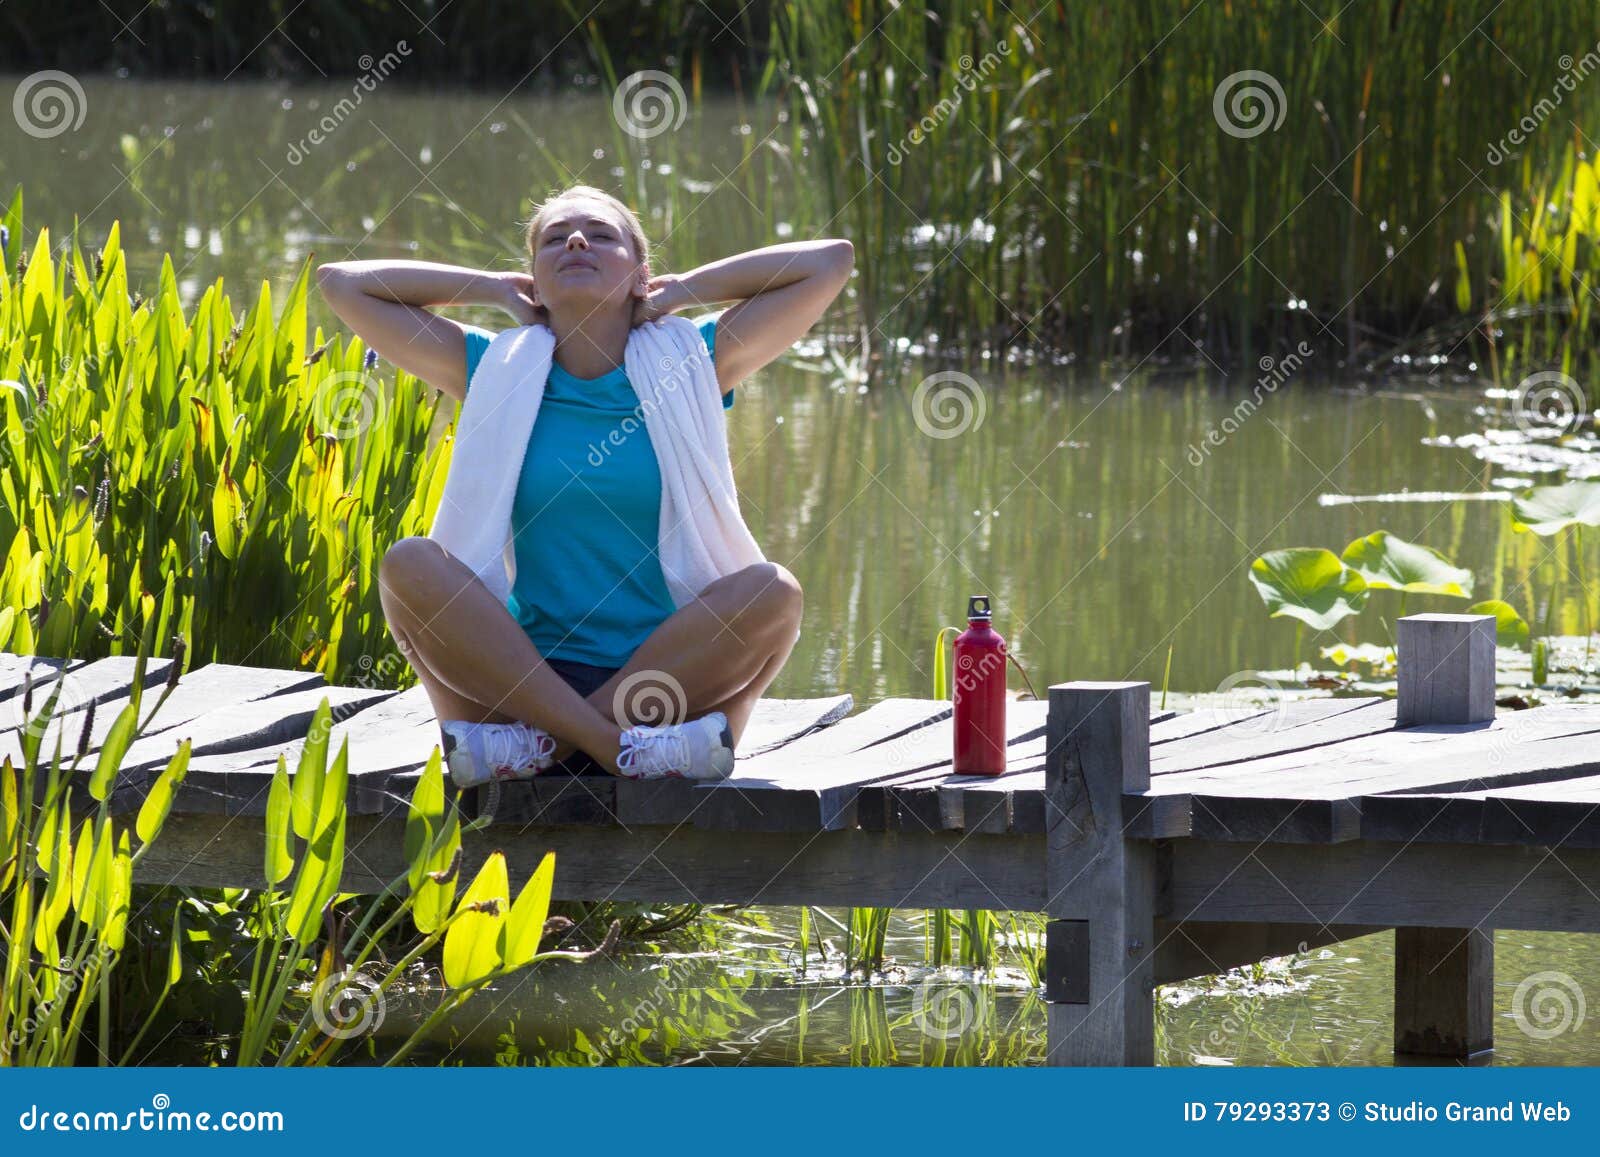 happy woman breathing for openness and healthy wellbeing over water